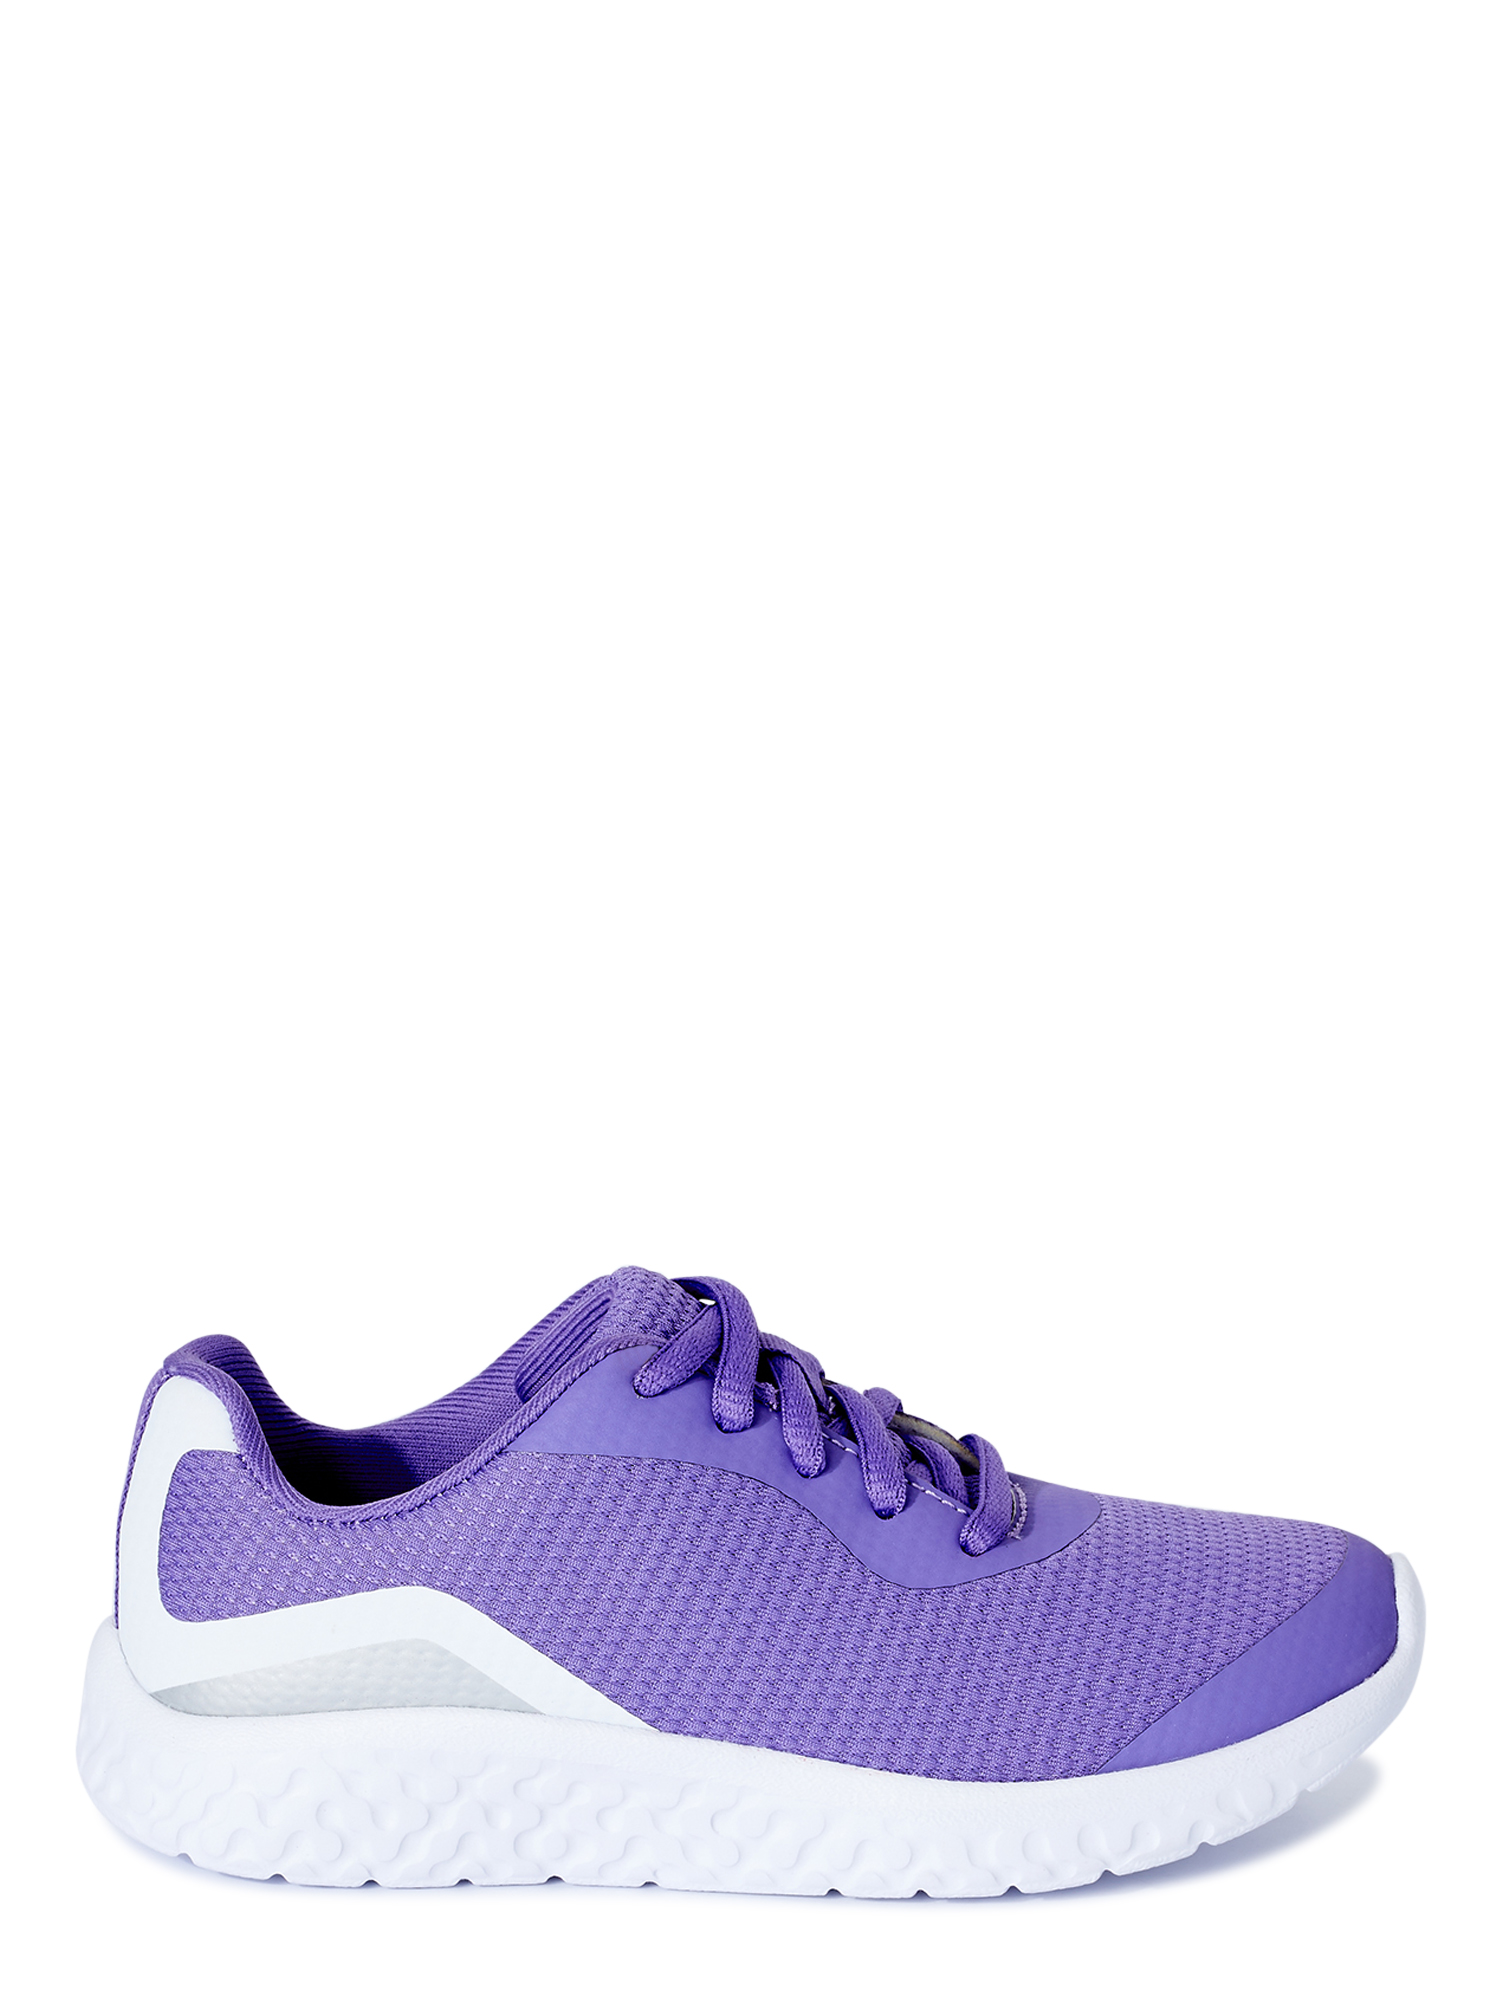 Athletic Works Core Lightweight Athletic Sneaker (Little Girls & Big Girls) - image 5 of 6